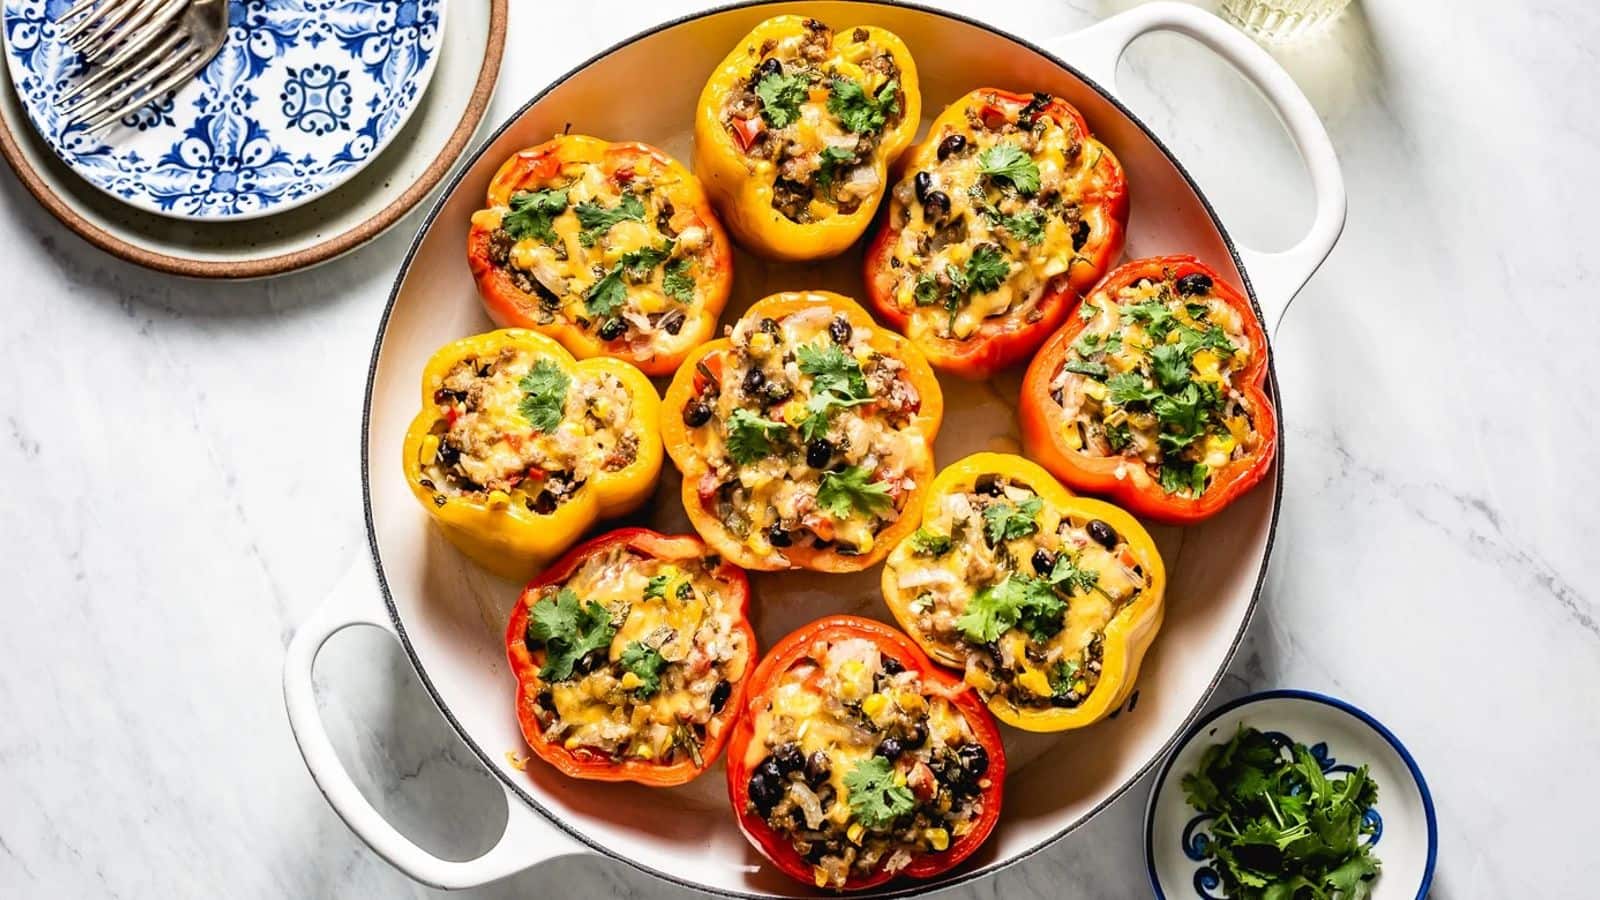 Try this tempting Tex-Mex quinoa-stuffed peppers recipe